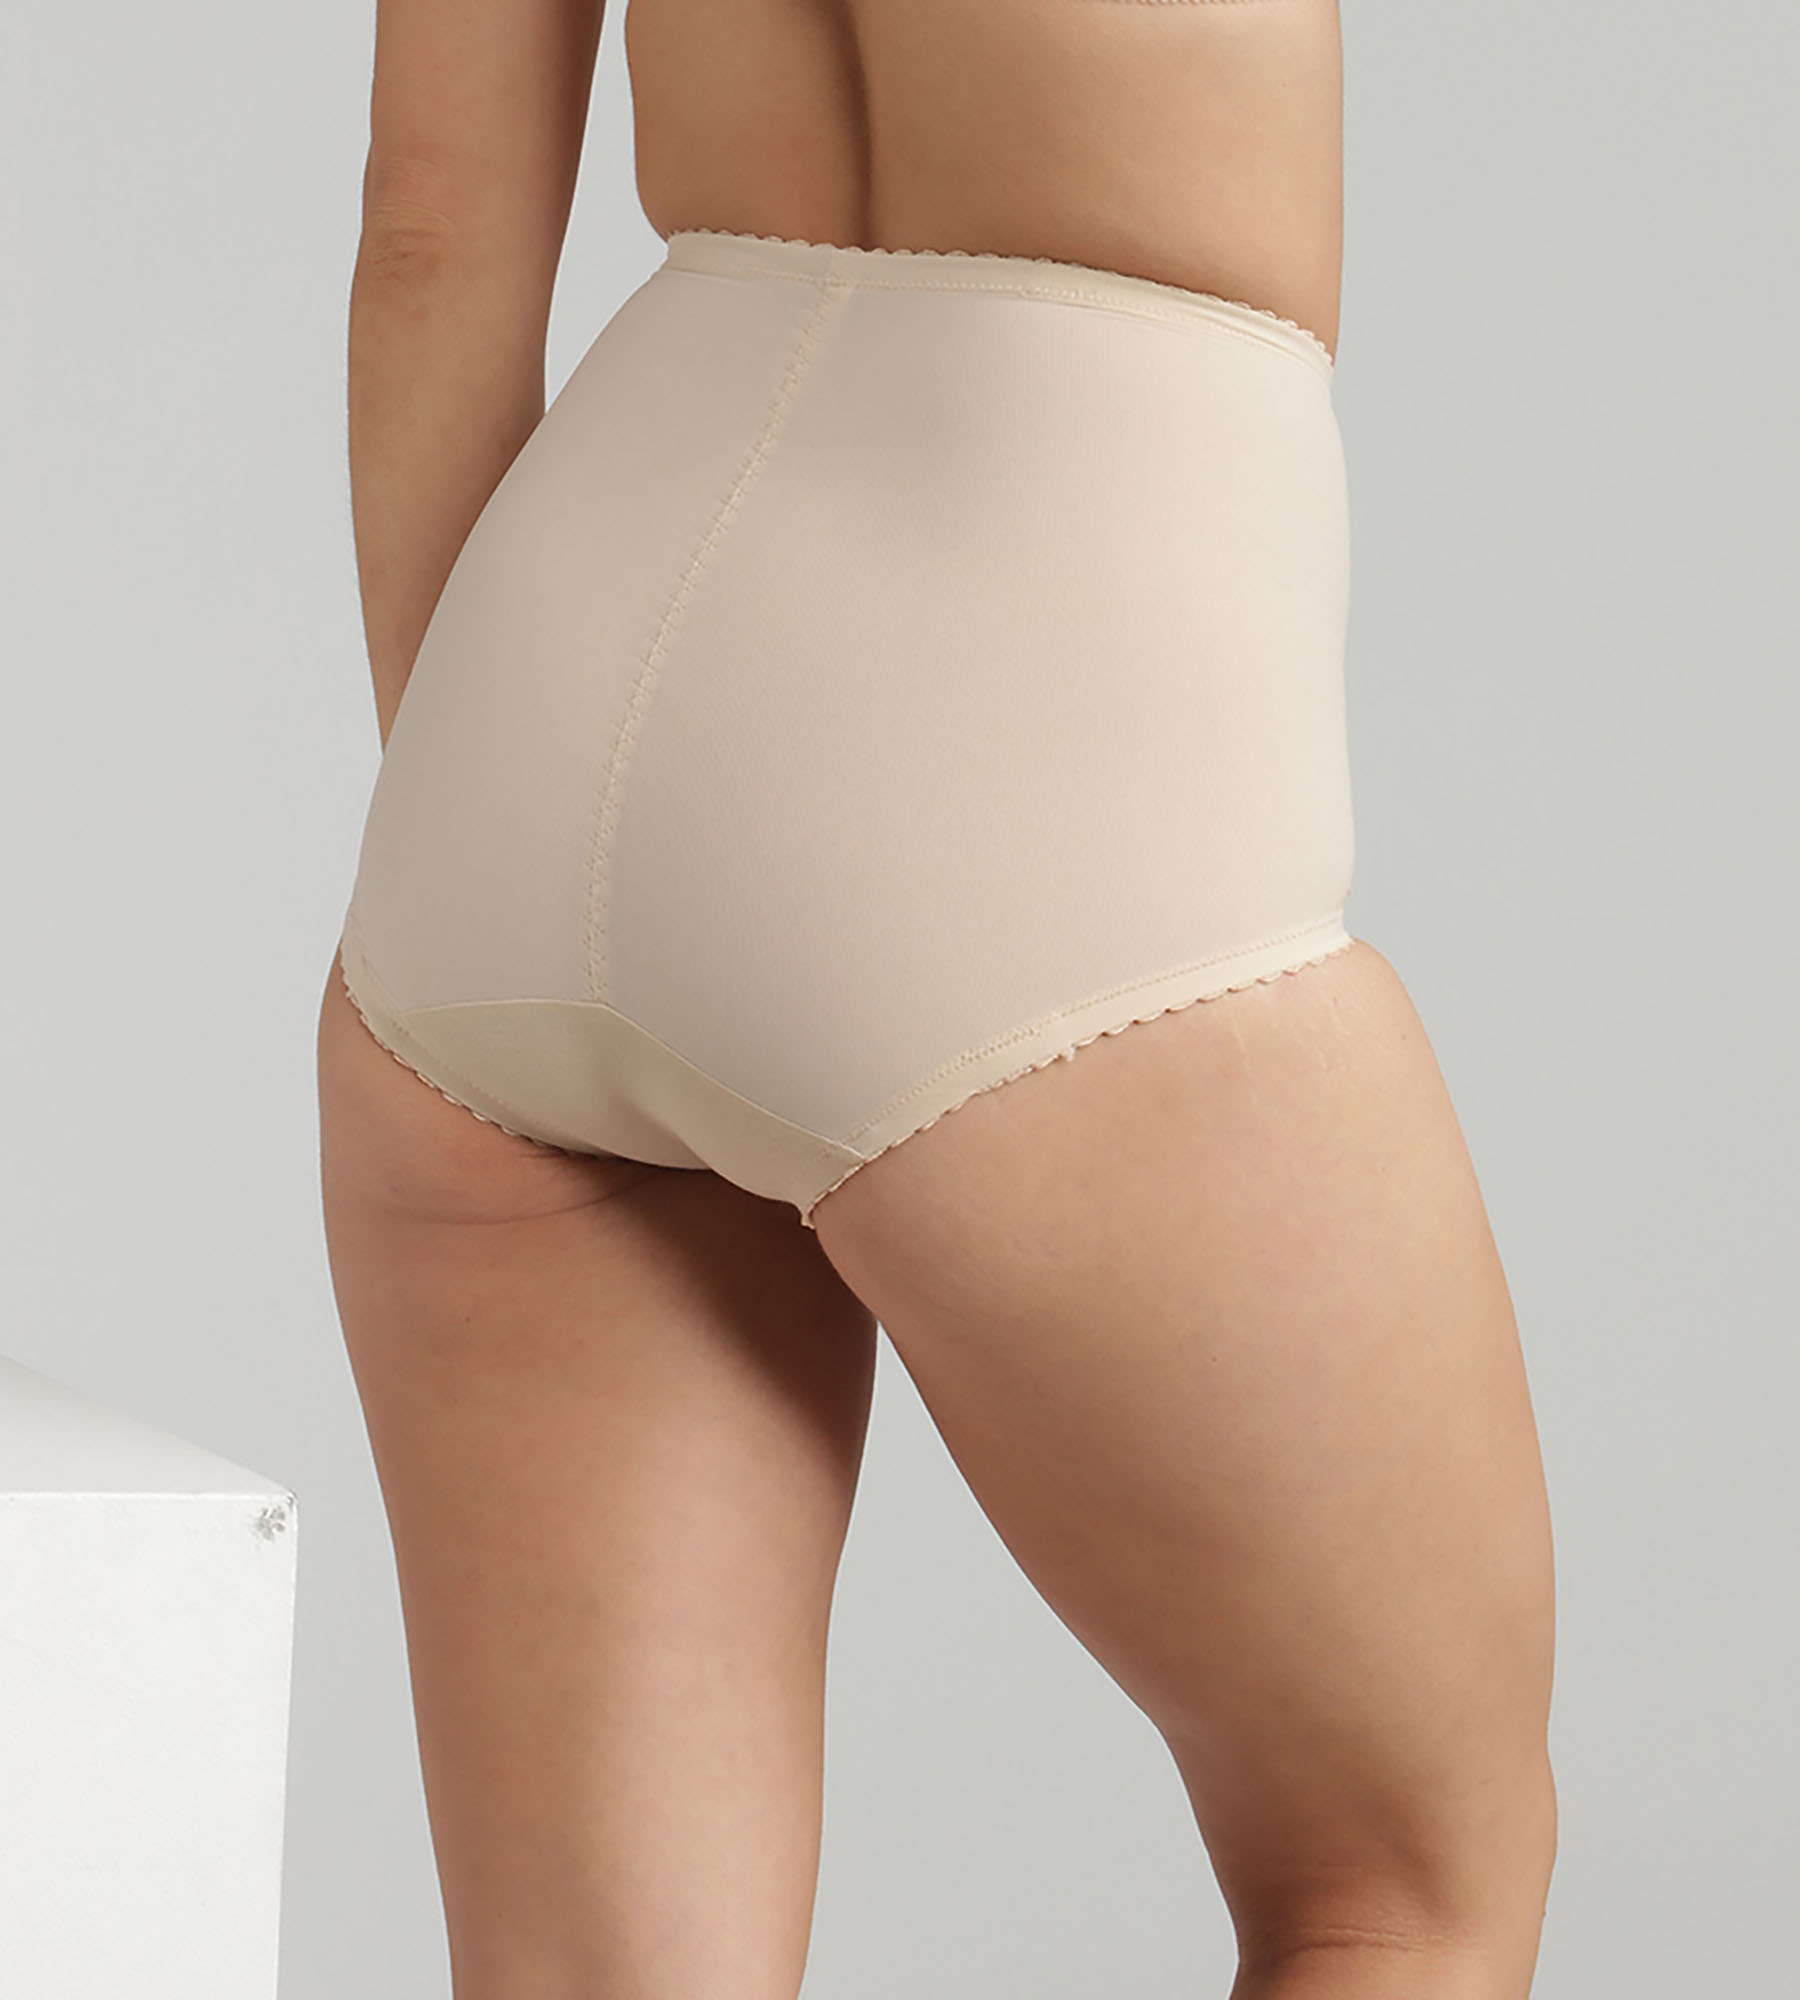 Vin Playtex I Can't Believe It's A Girdle Firm Control Panty Girdle Brief  Light Beige Small 2526 -  Canada